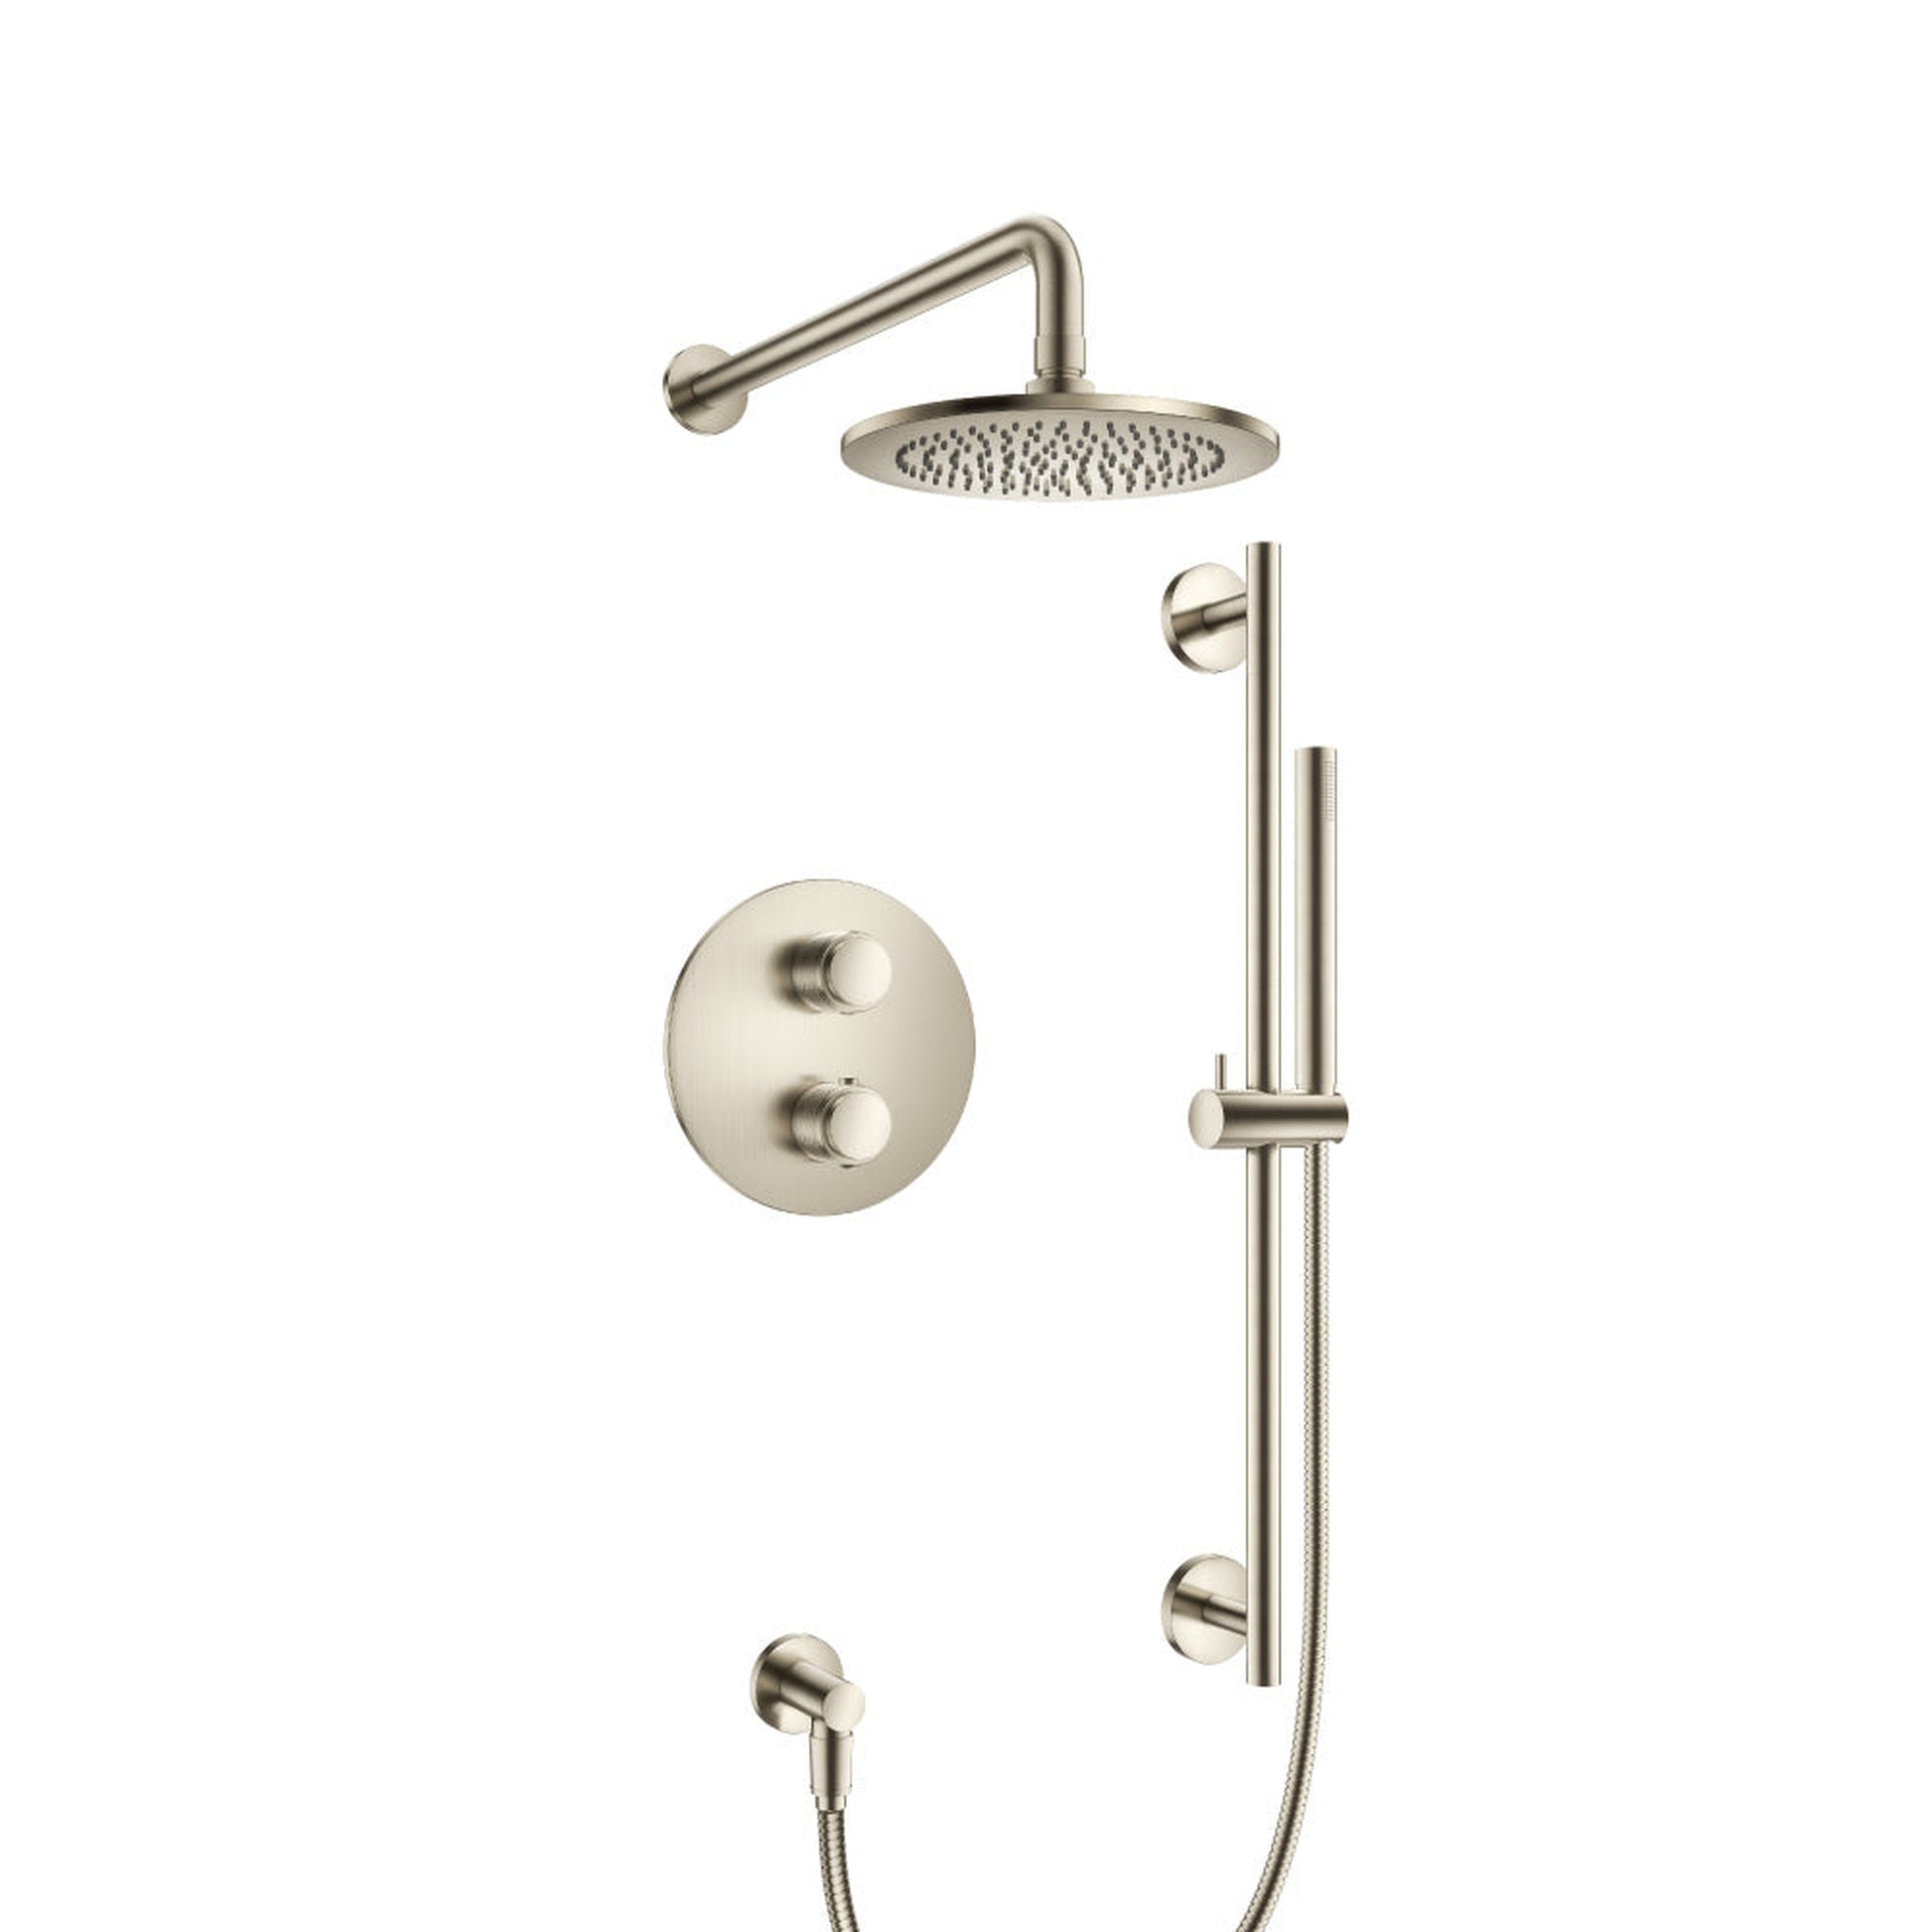 Isenberg Serie 250 Two Output Shower Set With Shower Head, Hand Held and Slide Bar in Brushed Nickel (250.7100BN)